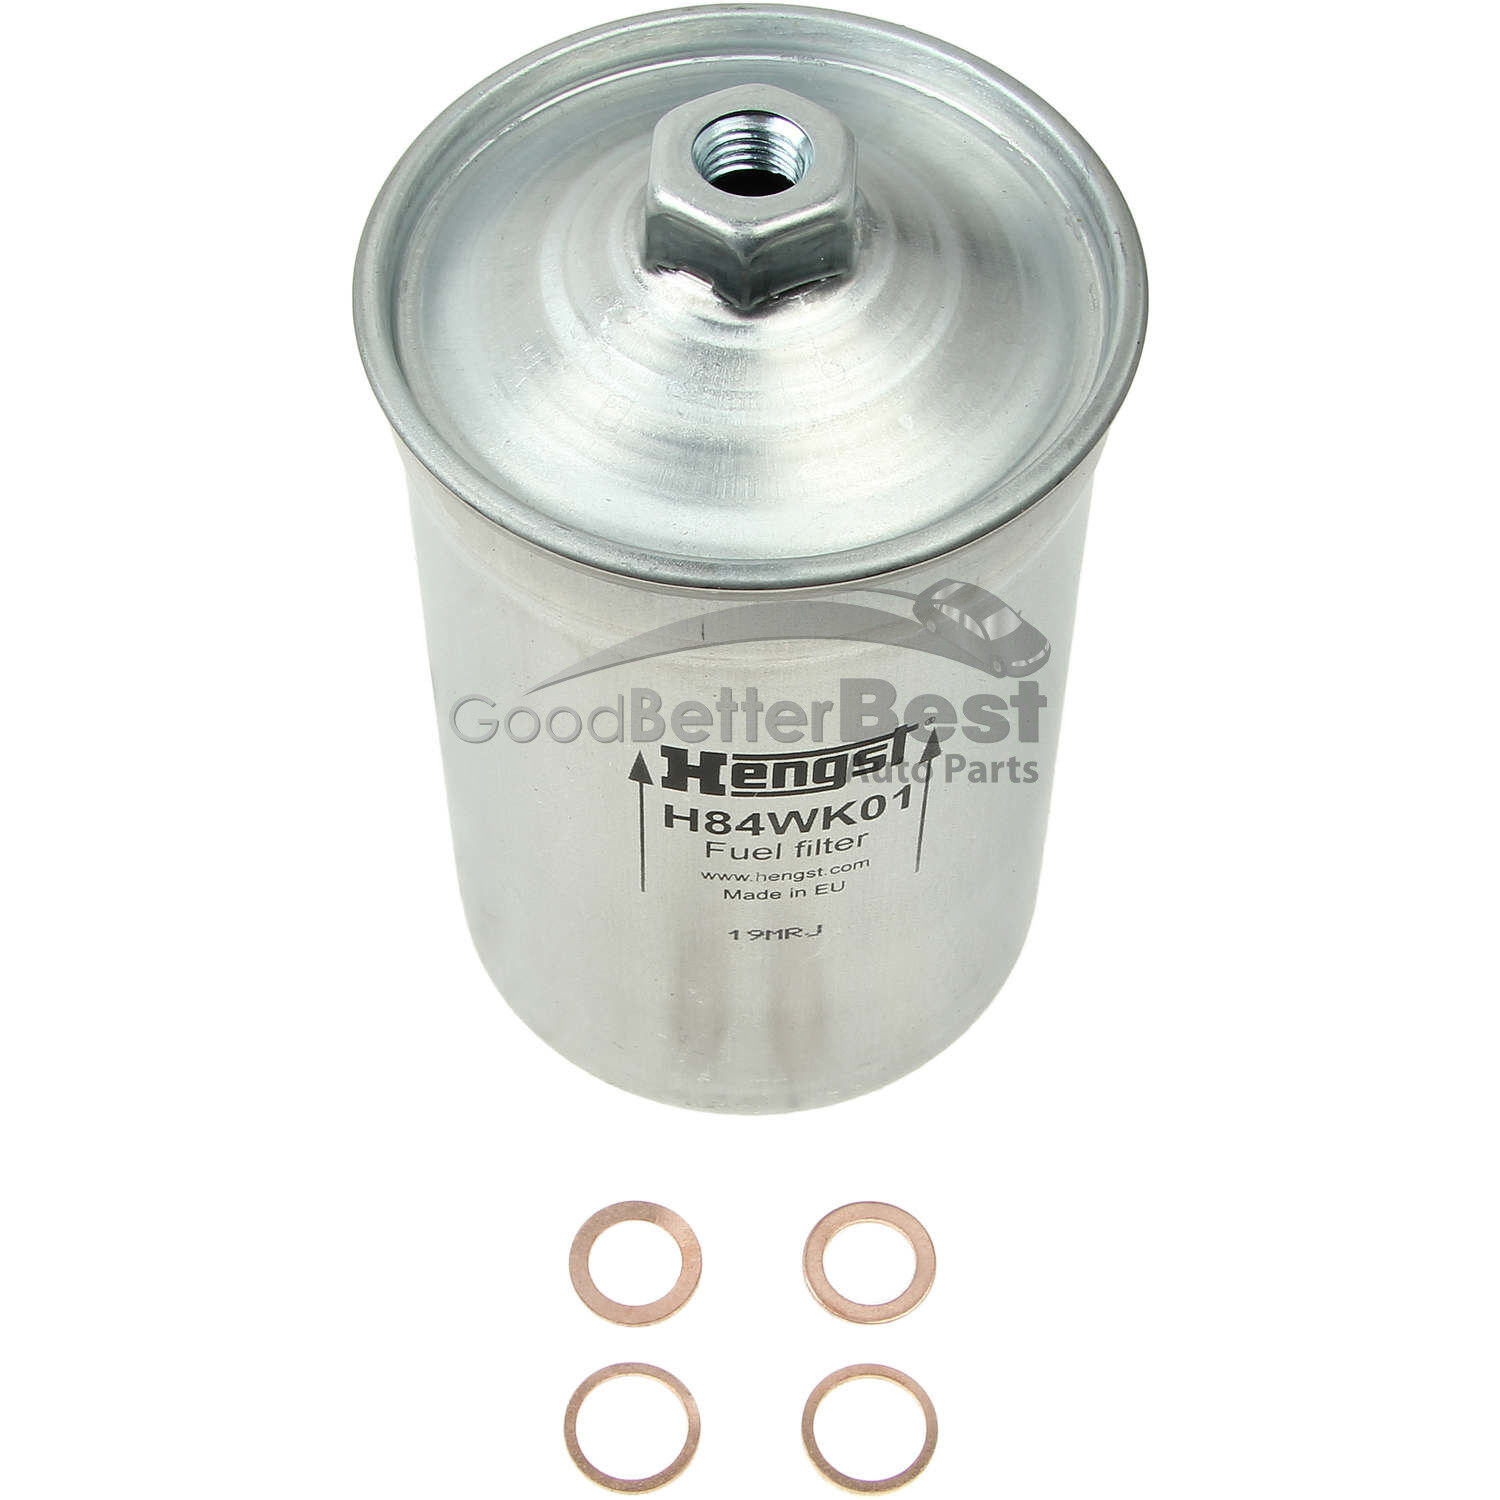 One New Hengst Fuel Filter H84WK01 for Saab for Volvo